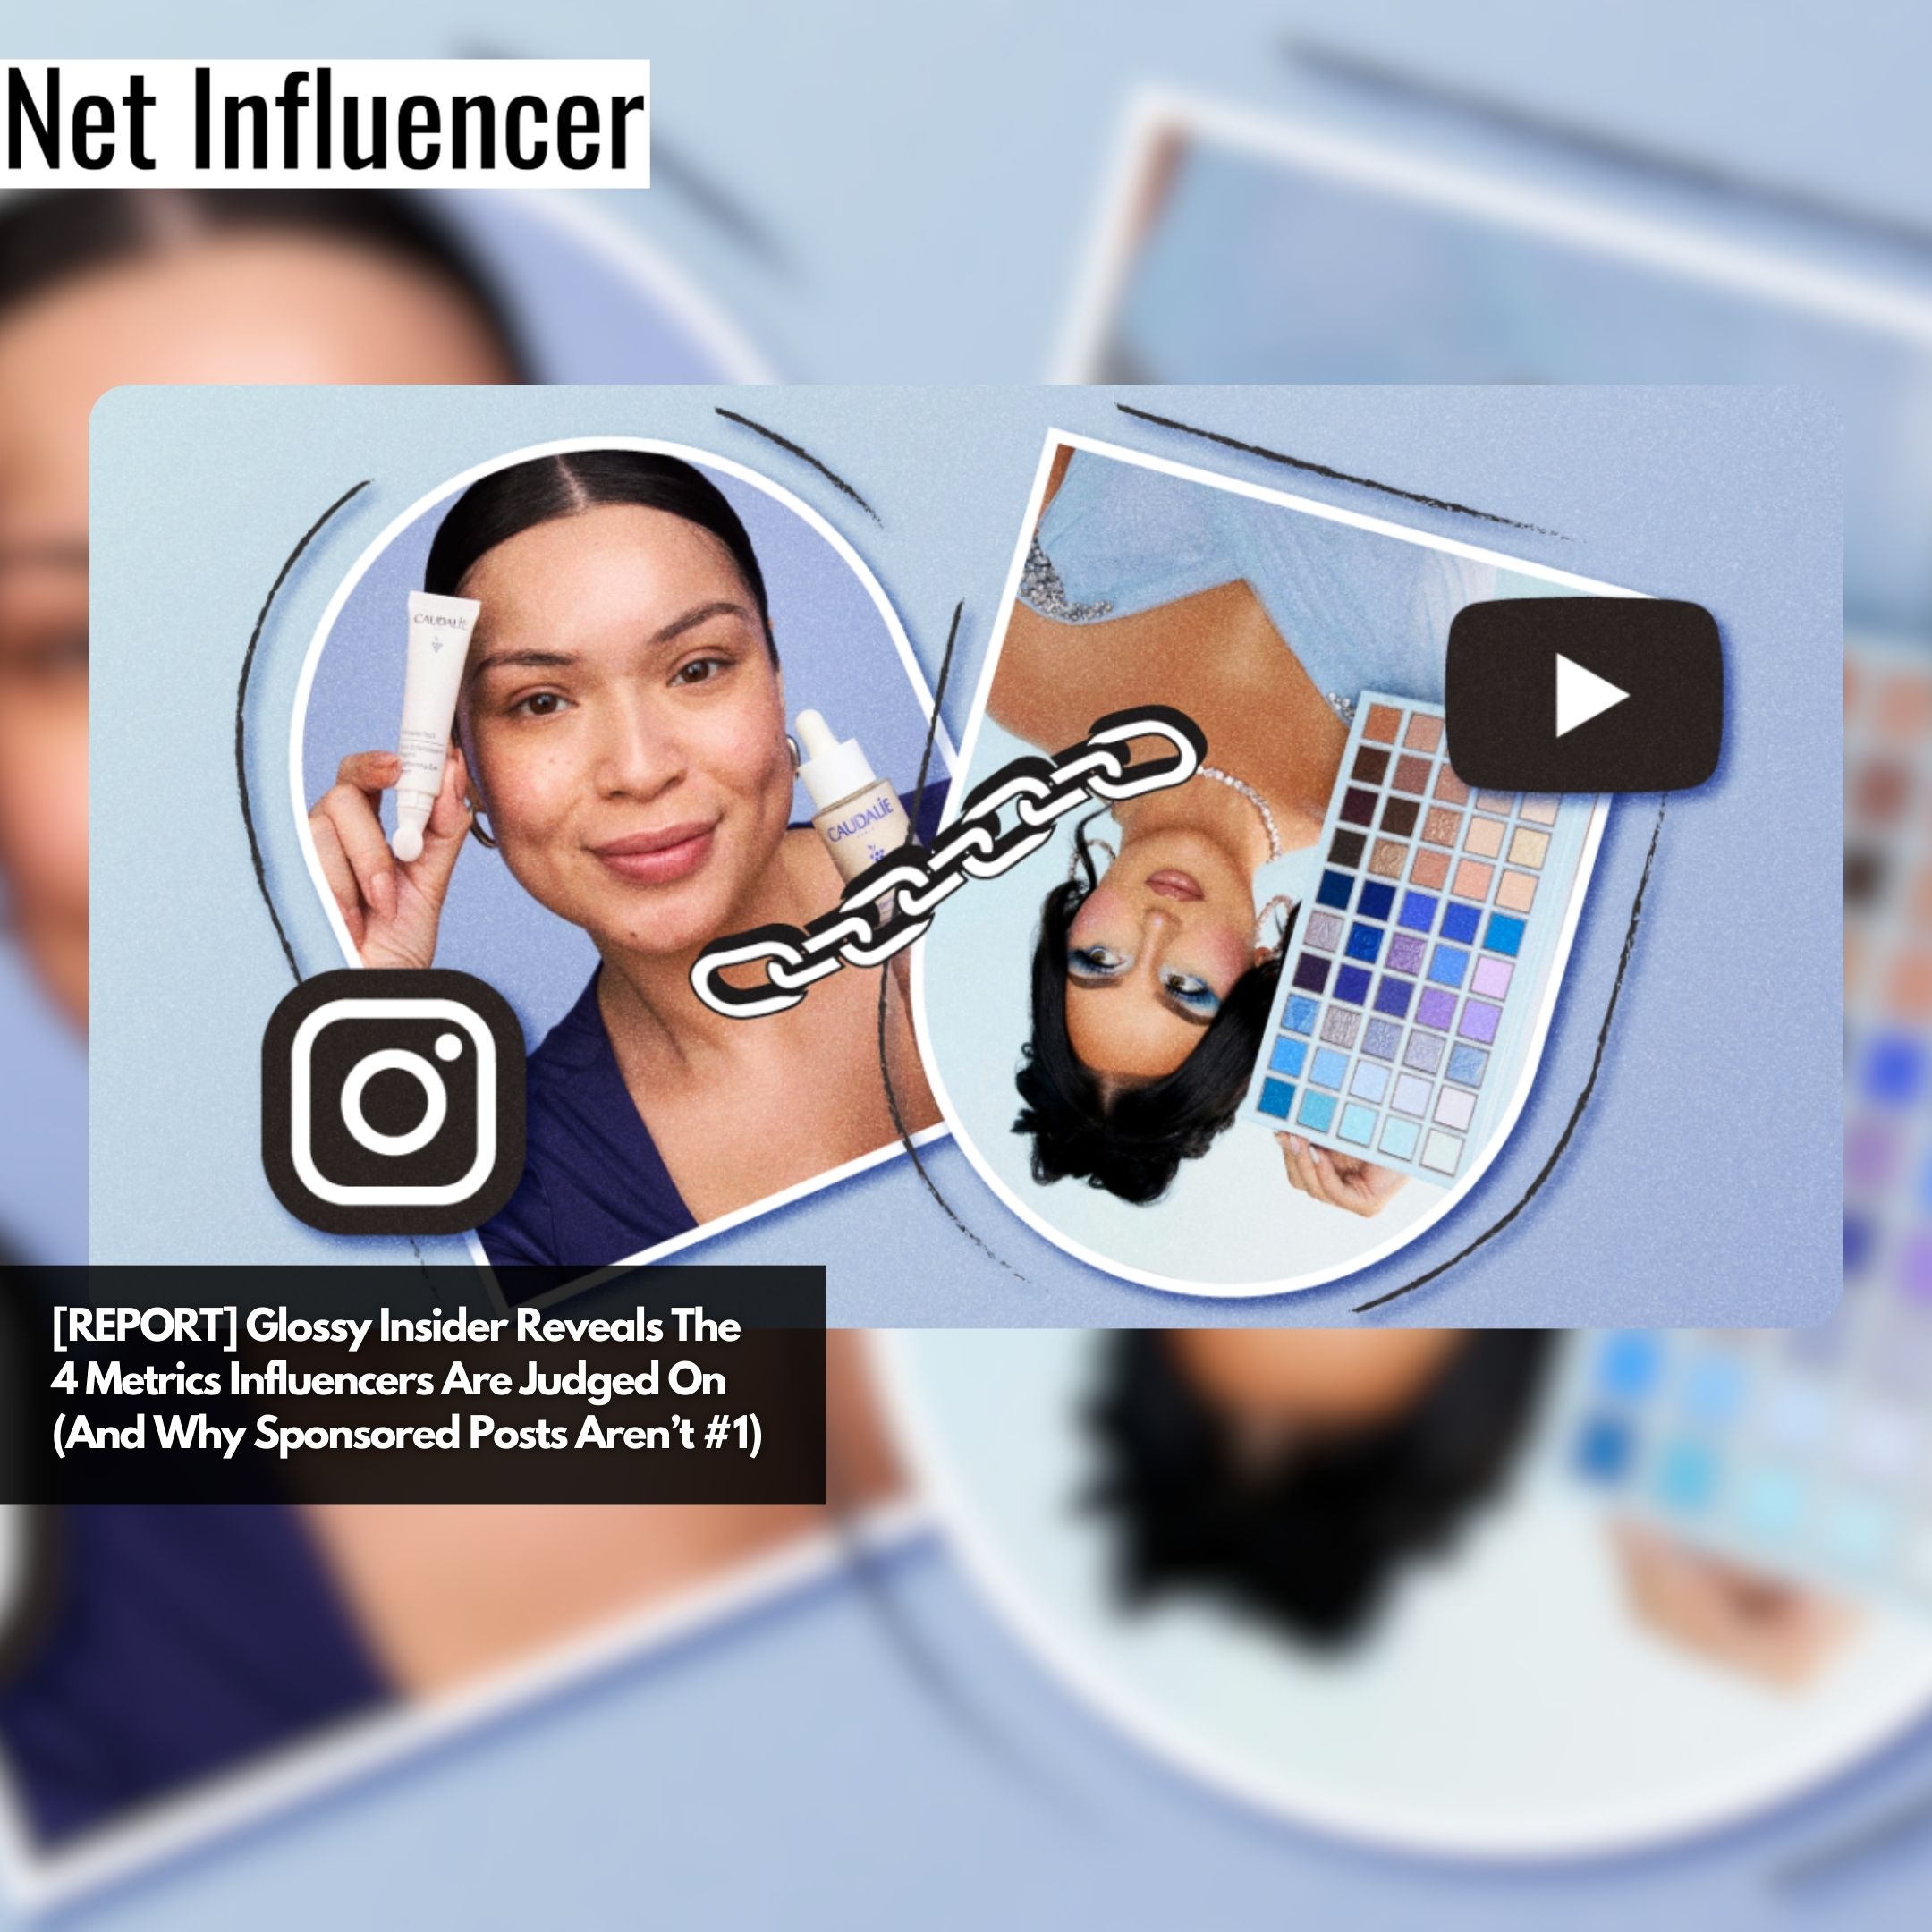 [REPORT] Glossy Insider Reveals The 4 Metrics Influencers Are Judged On (And Why Sponsored Posts Aren’t #1)